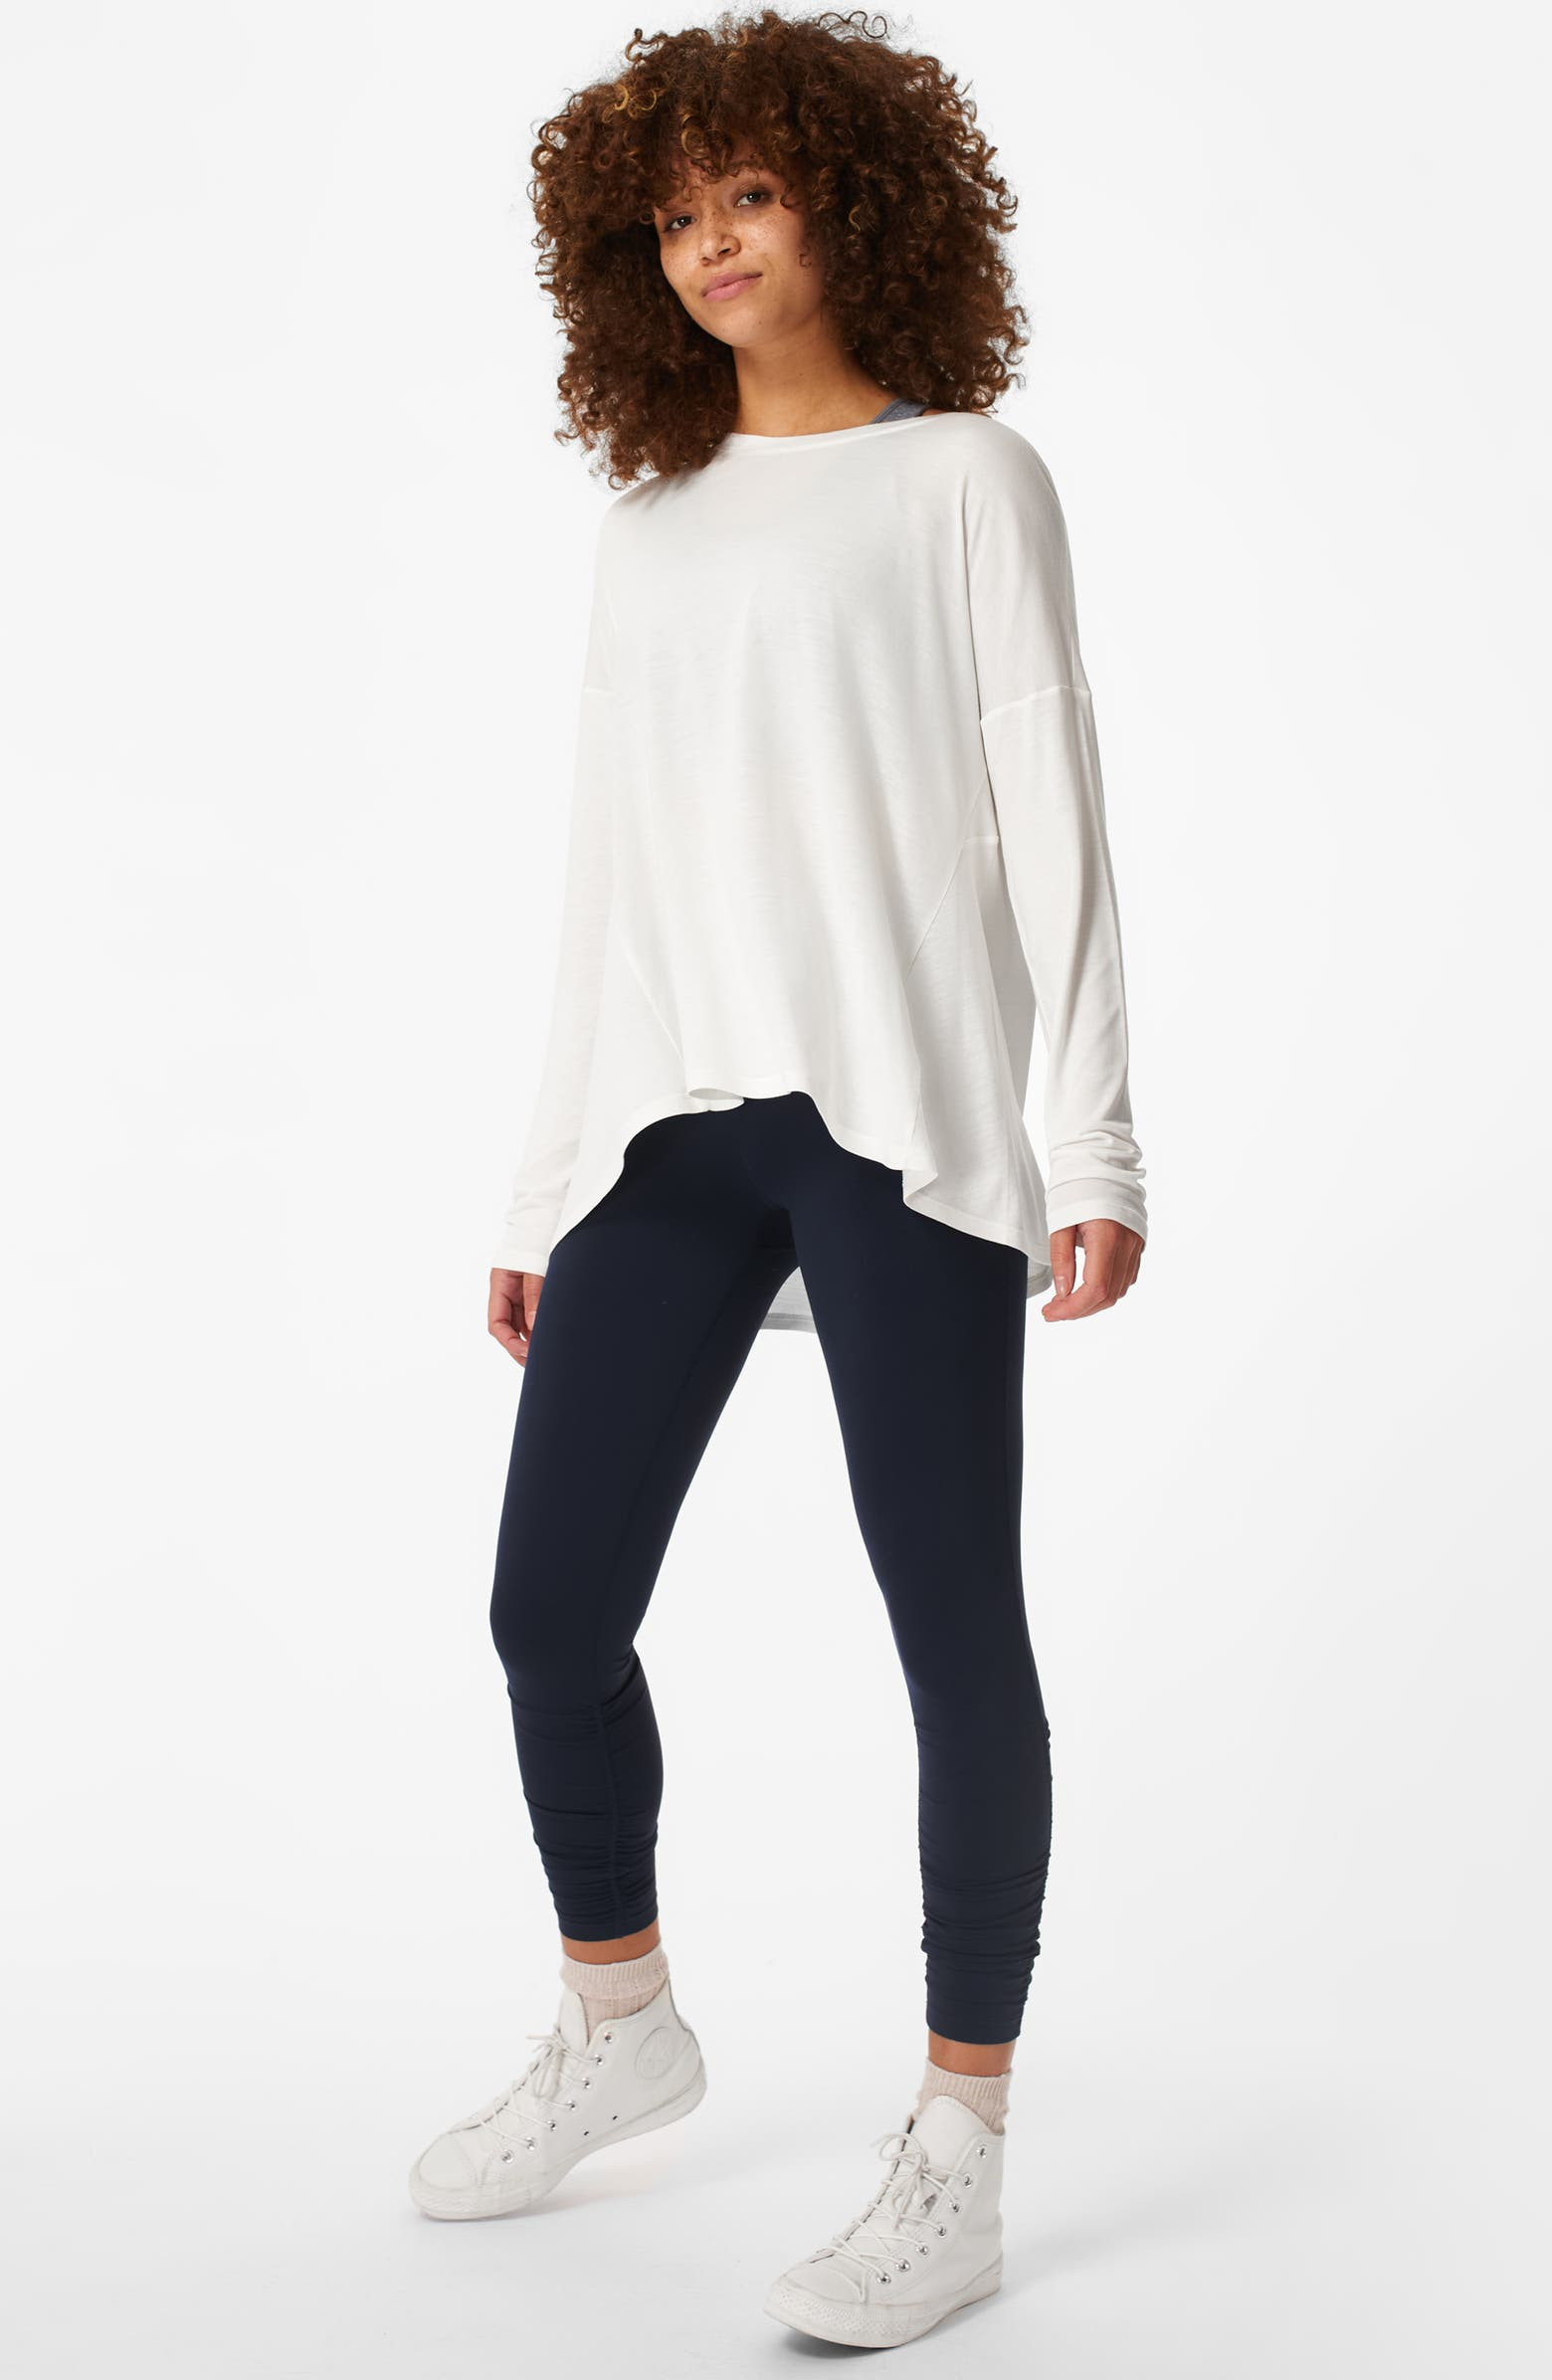  Shirts To Wear Over White Leggings